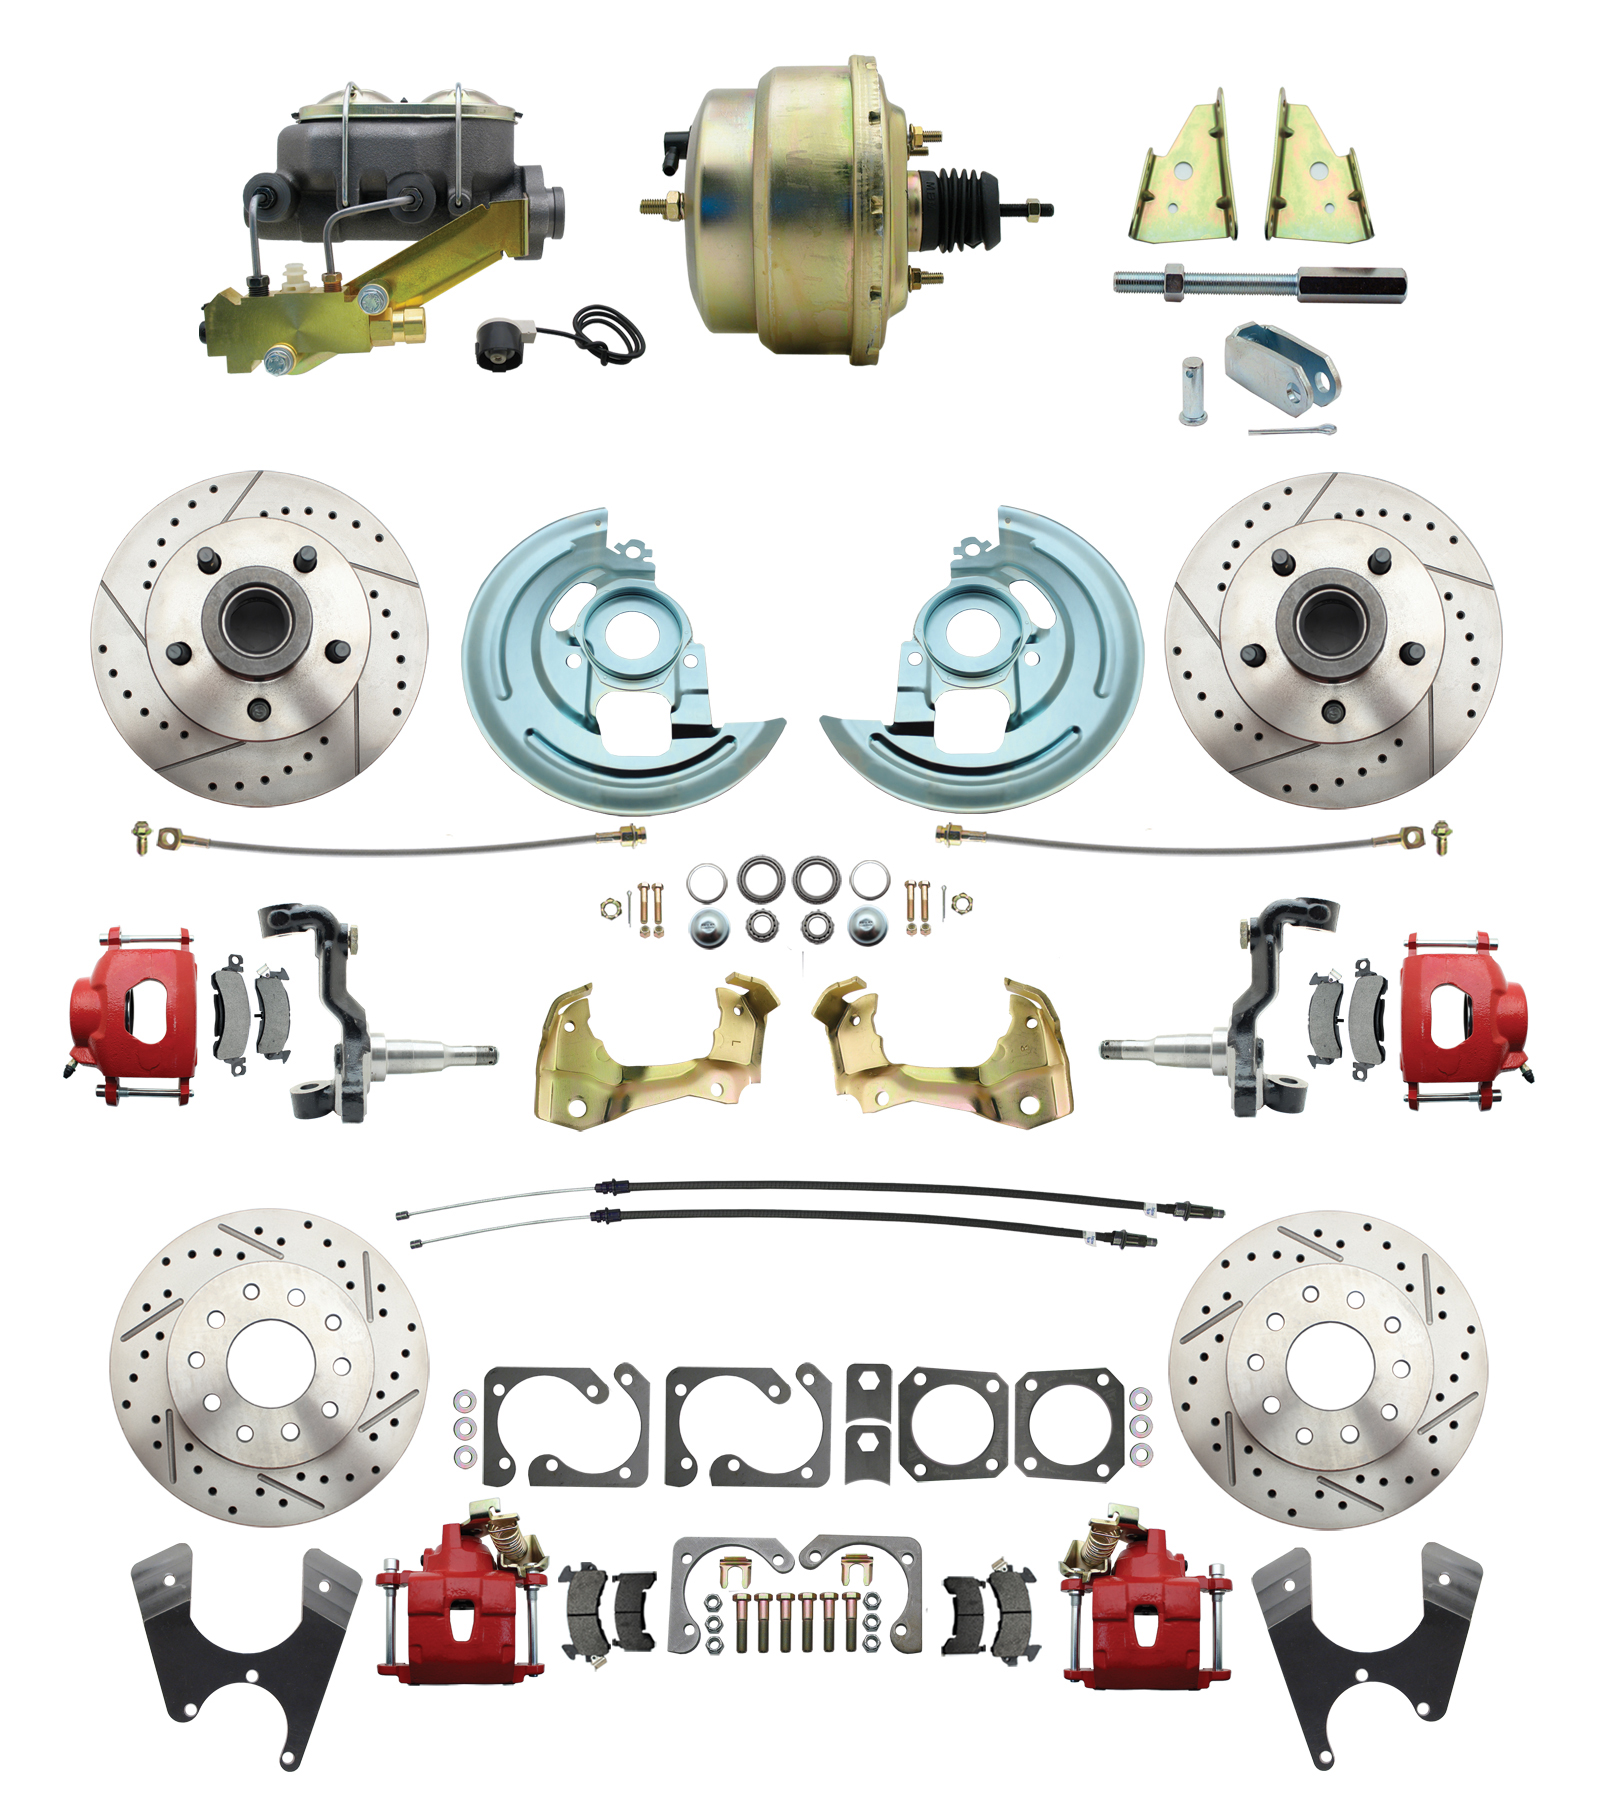 1967-1969 Camaro/ Firebird & 1968-1974 Chevy Nova Front & Rear Power Disc Brake Conversion Kit Drilled & Slotted & Powder Coated Red Calipers Rotors W/ 8Dual Zinc Booster Kit